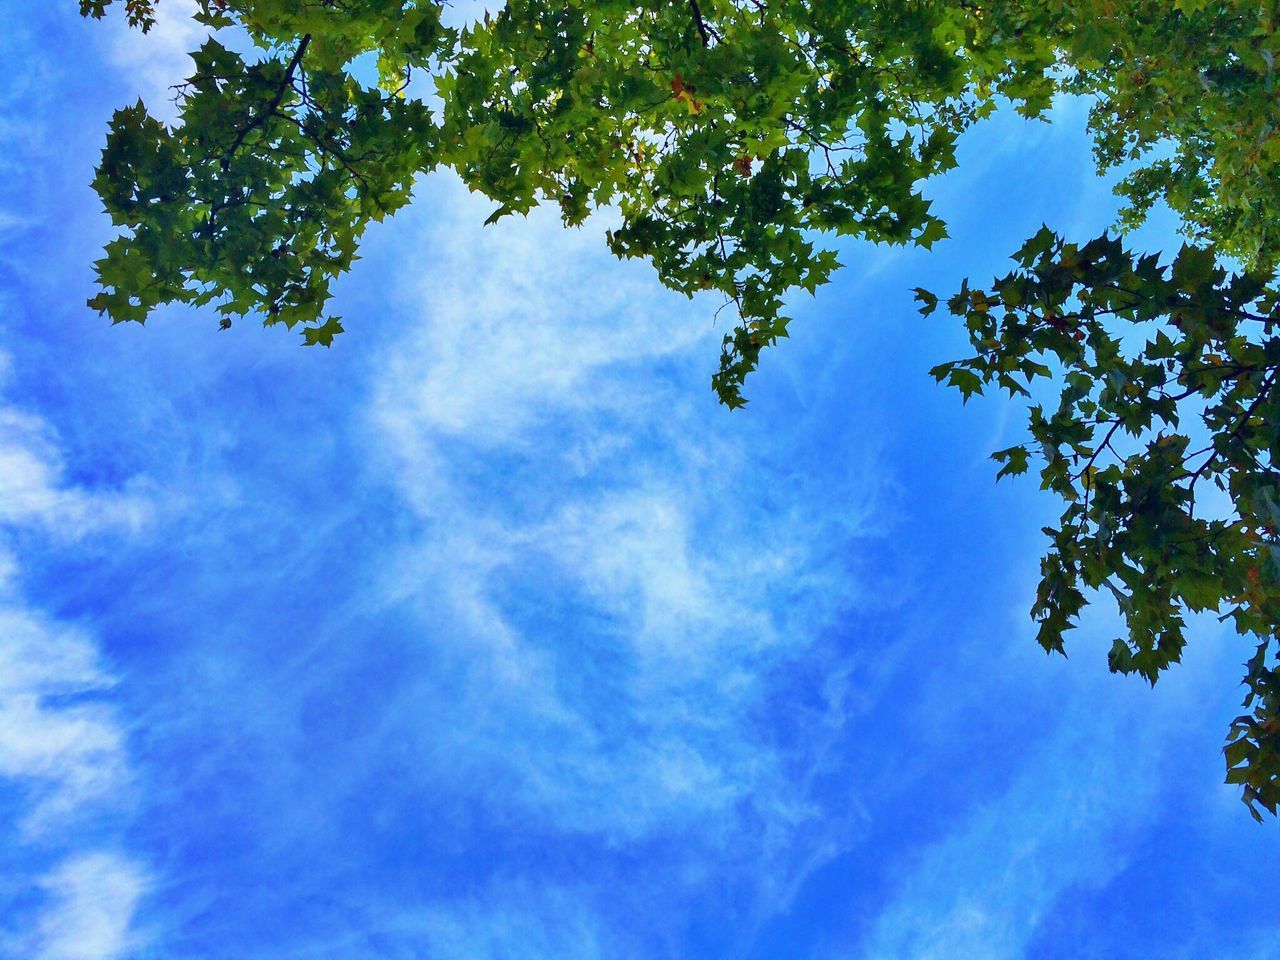 low angle view, tree, sky, growth, blue, cloud - sky, nature, beauty in nature, tranquility, cloud, branch, leaf, green color, high section, scenics, treetop, day, cloudy, outdoors, no people